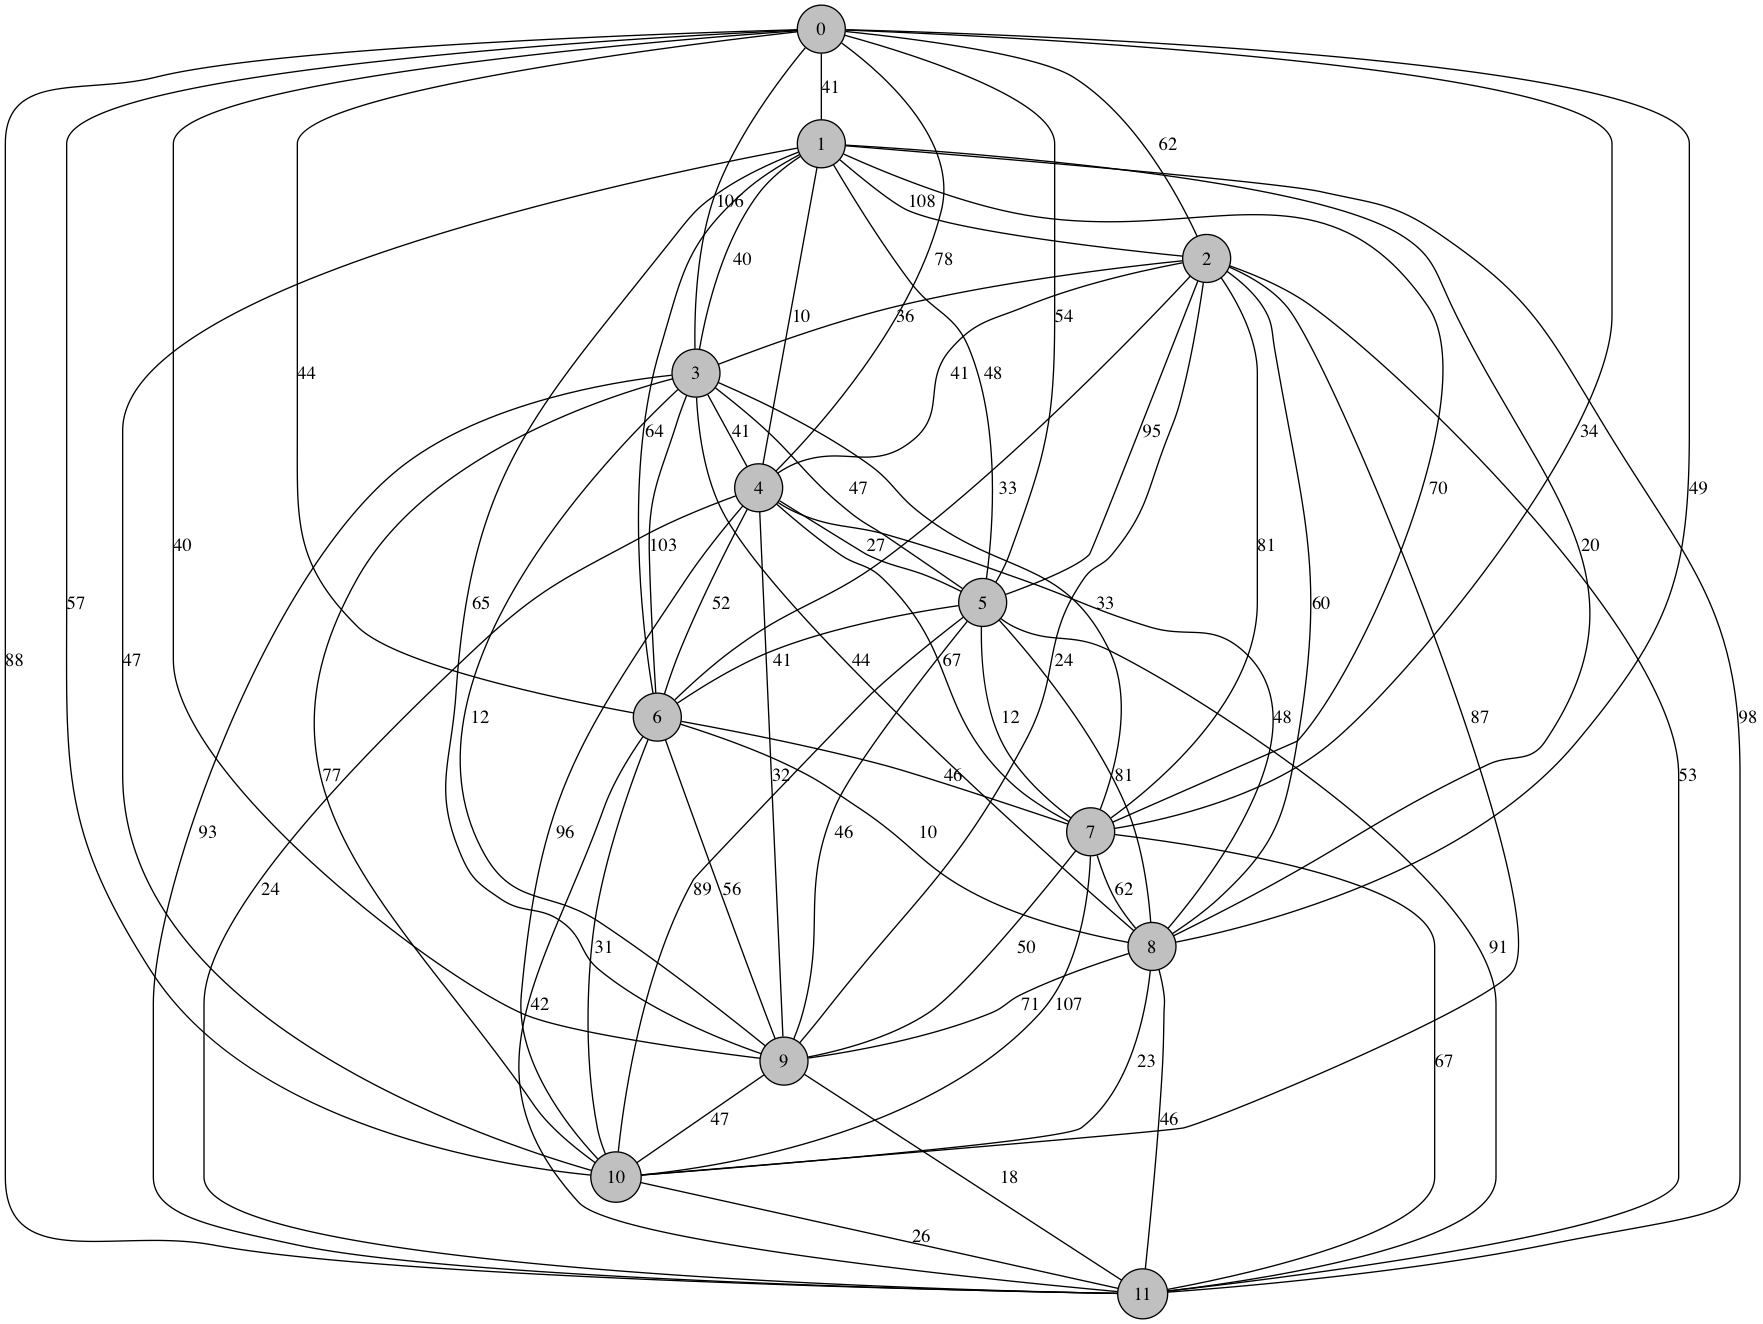 TSP graph with 12 nodes